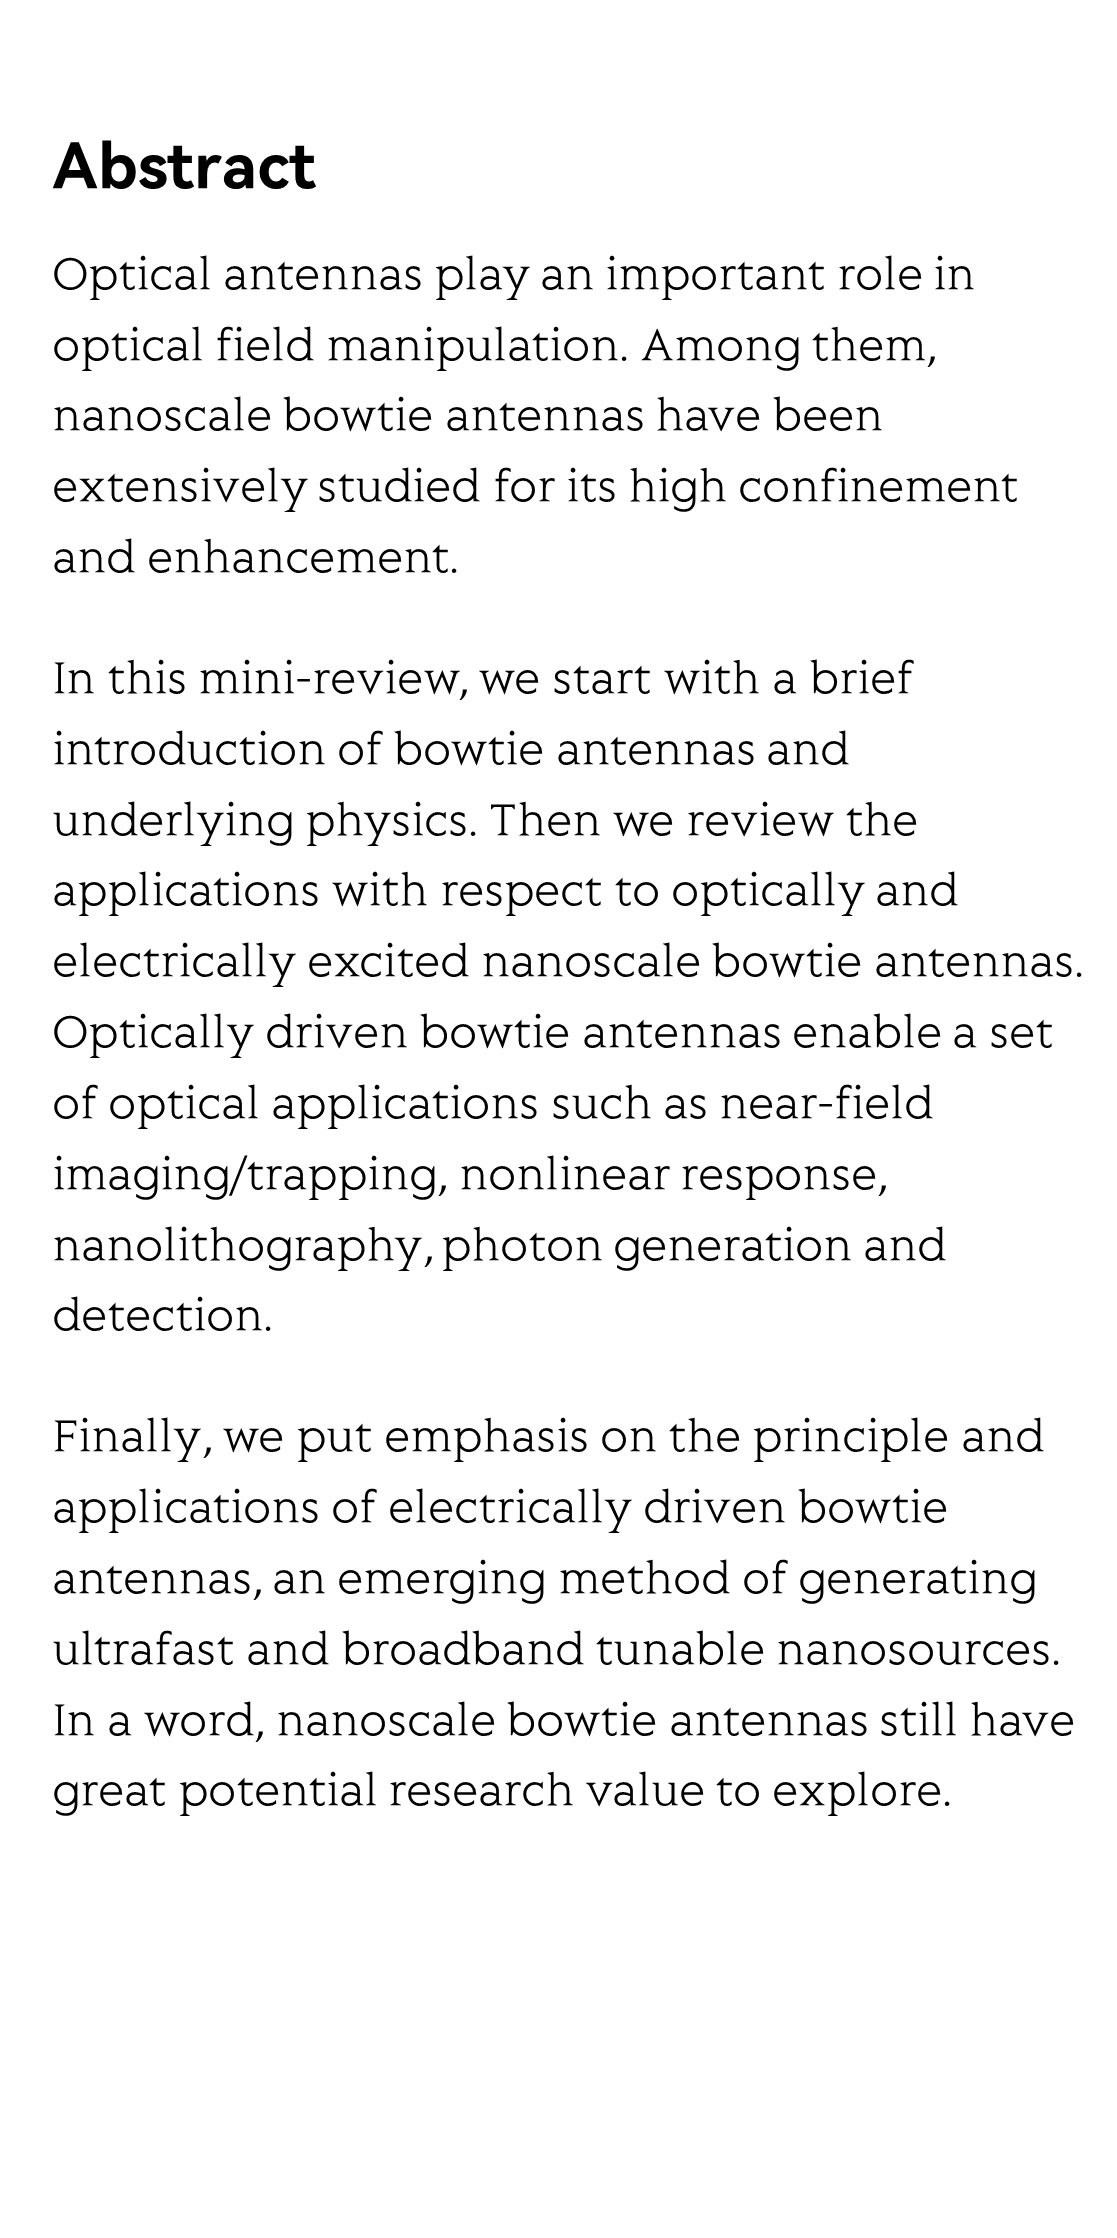 Applications of optically and electrically driven nanoscale bowtie antennas_2